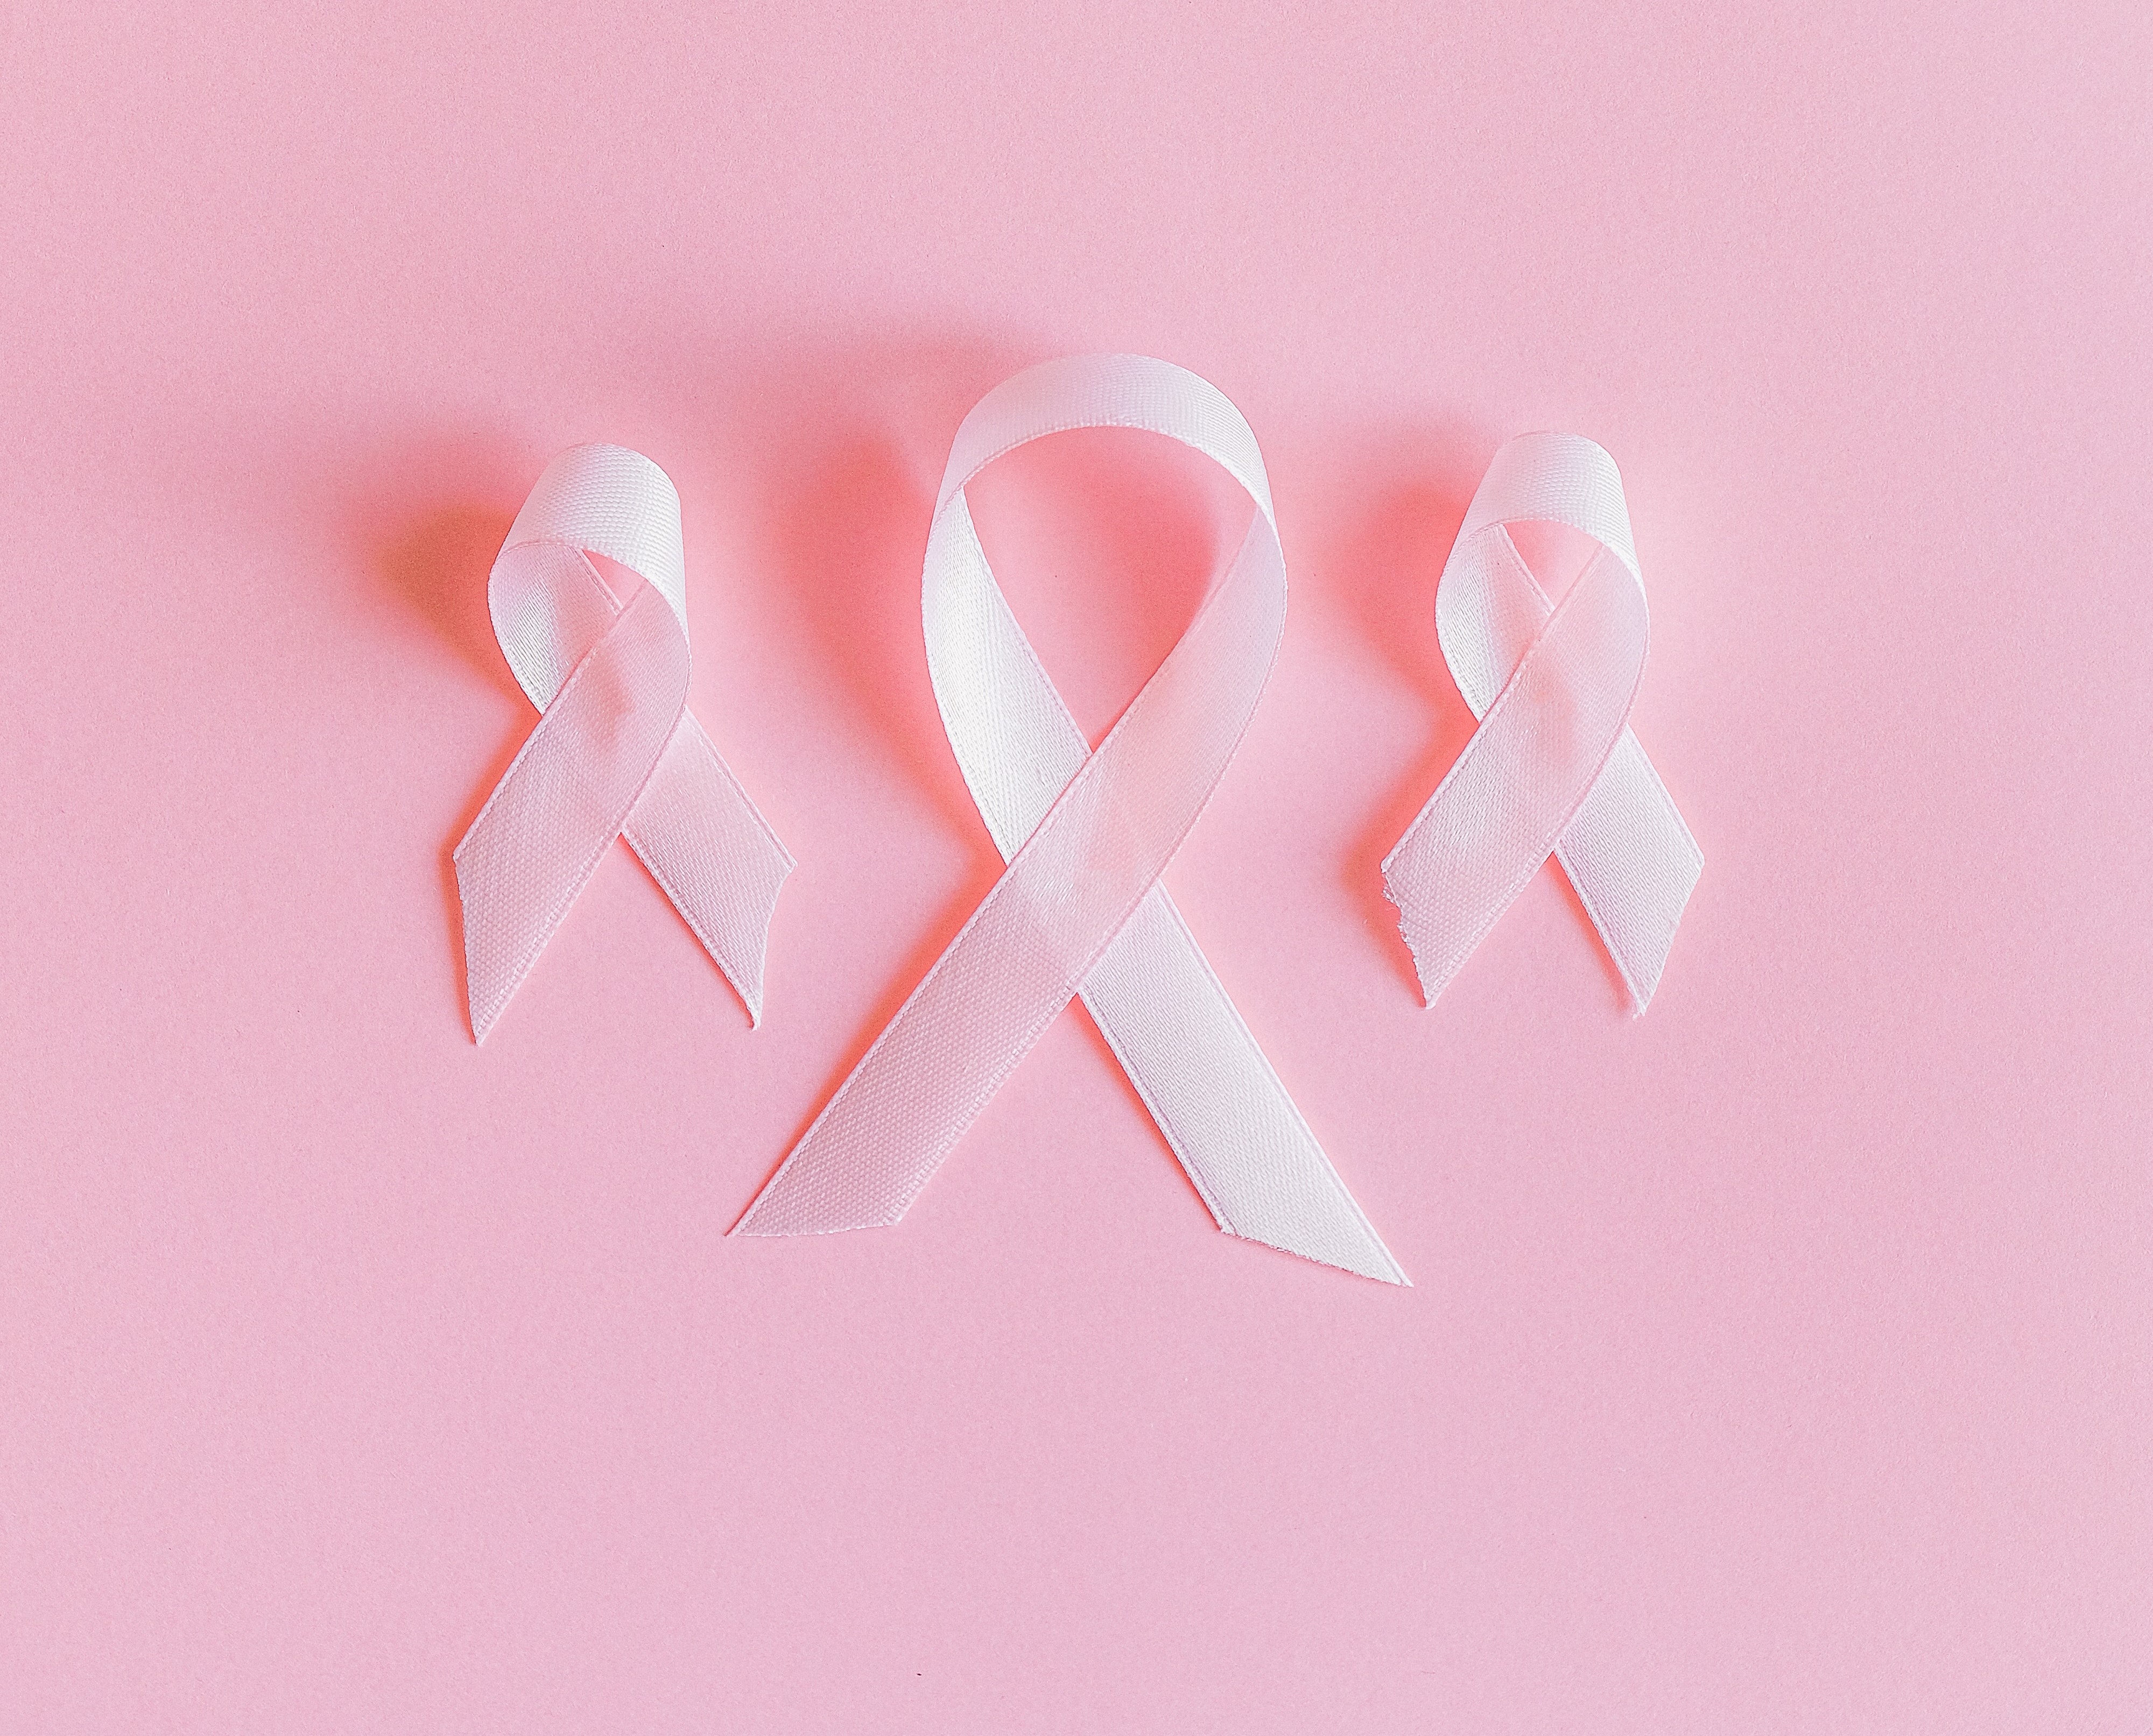 October Is National Breast Cancer Awareness Month - Premier Family Medical